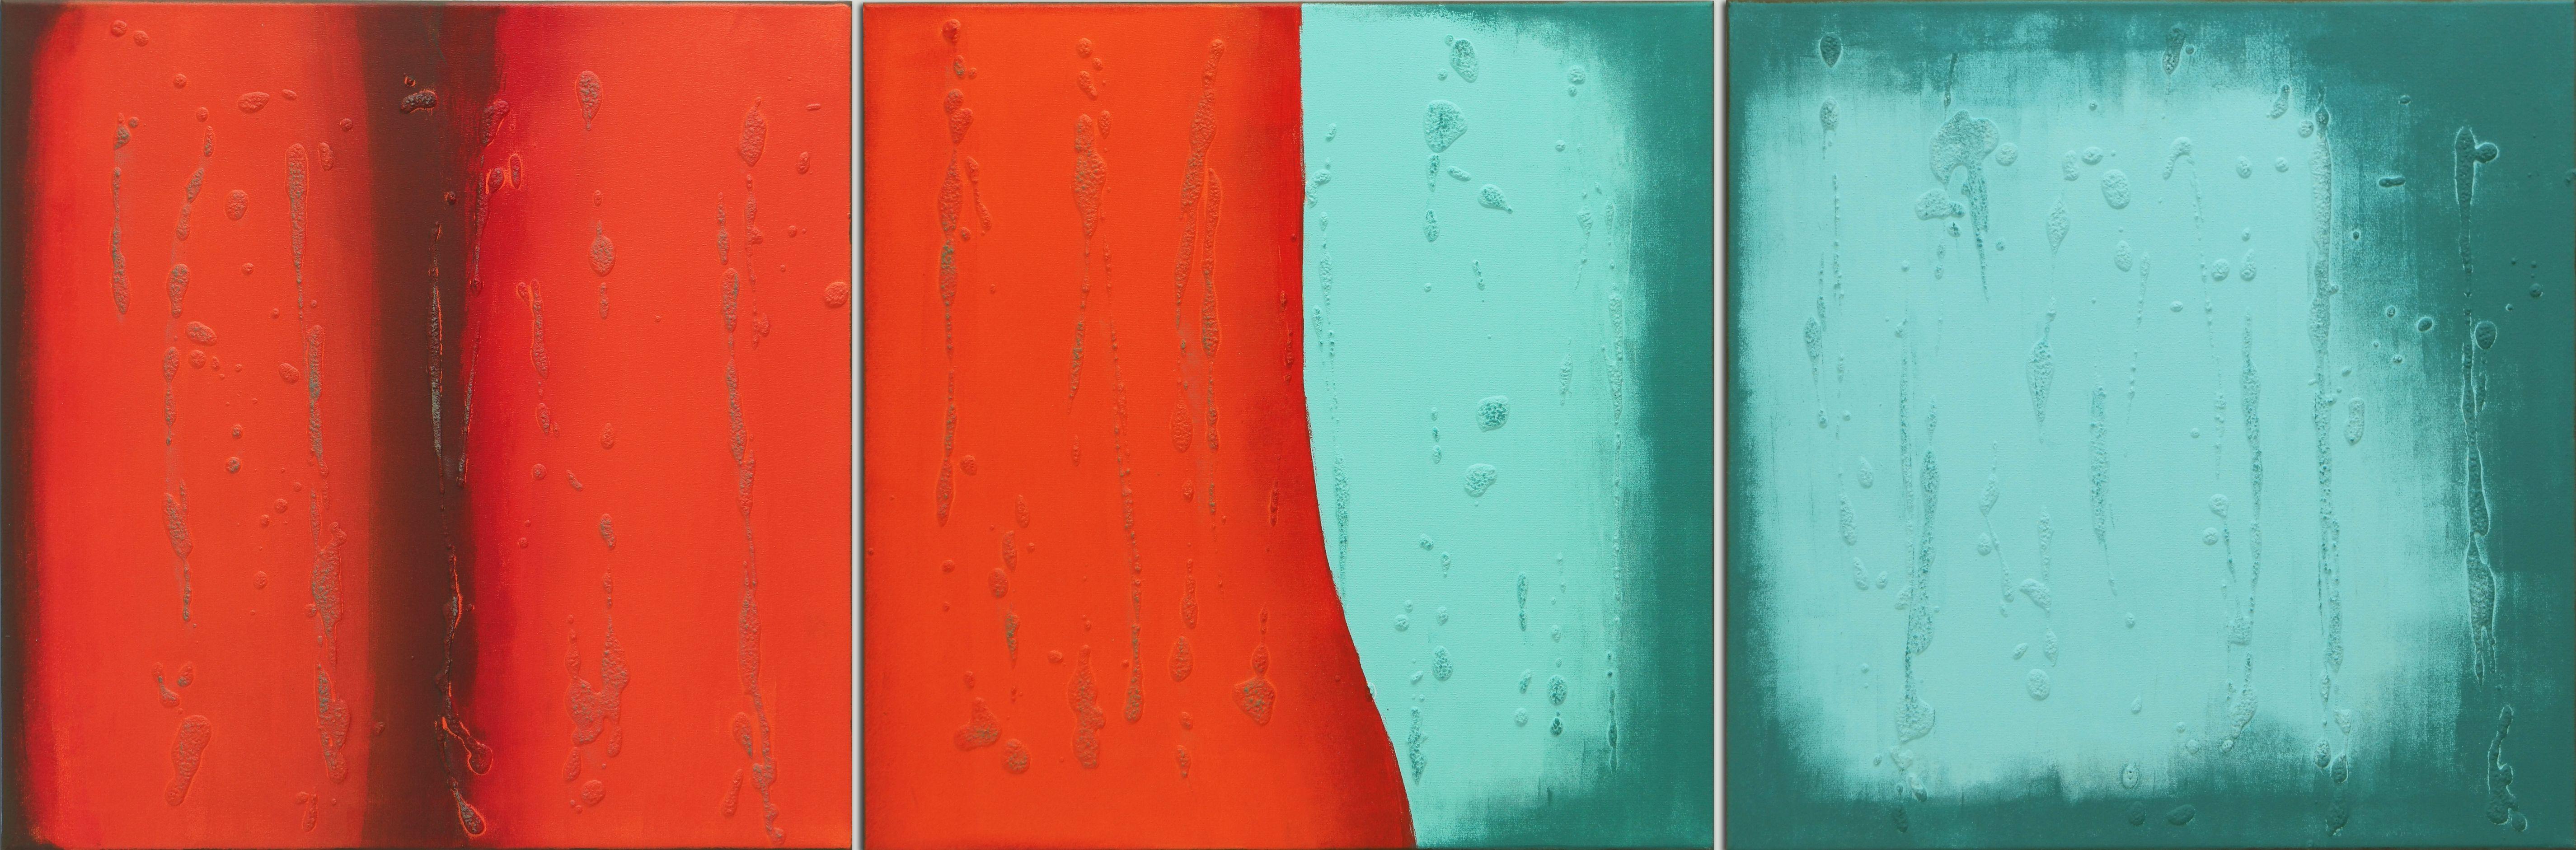 Ronald Hunter Abstract Painting - Stream Orange & Blue - Triptych, Painting, Acrylic on Canvas